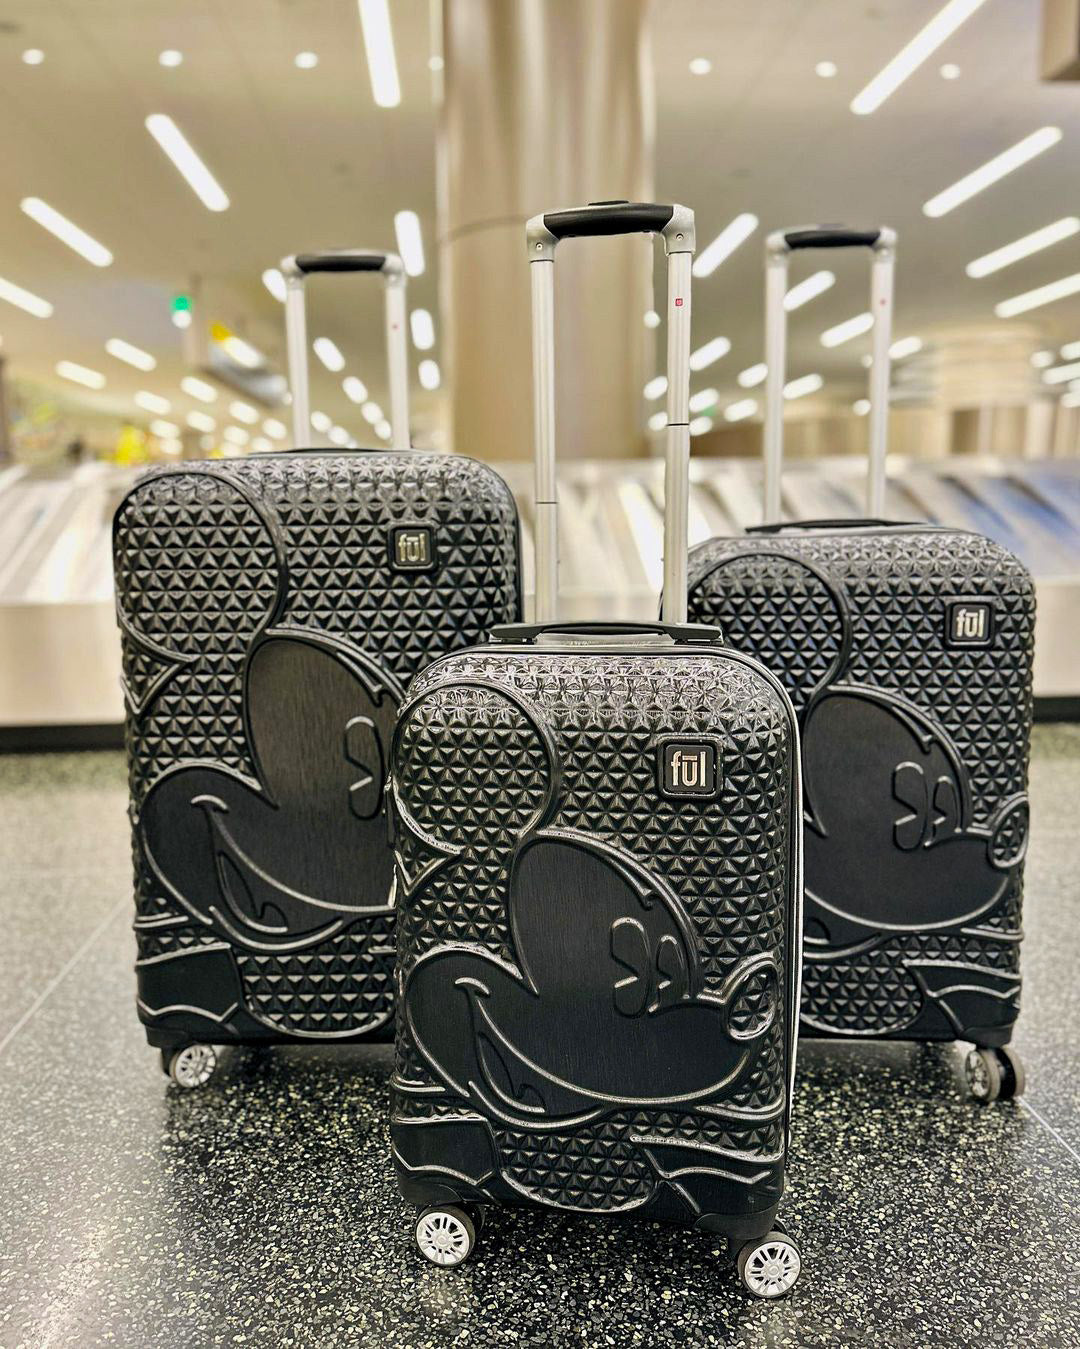 Ful Disney Mickey Mouse three piece rolling luggage suitcase set in black